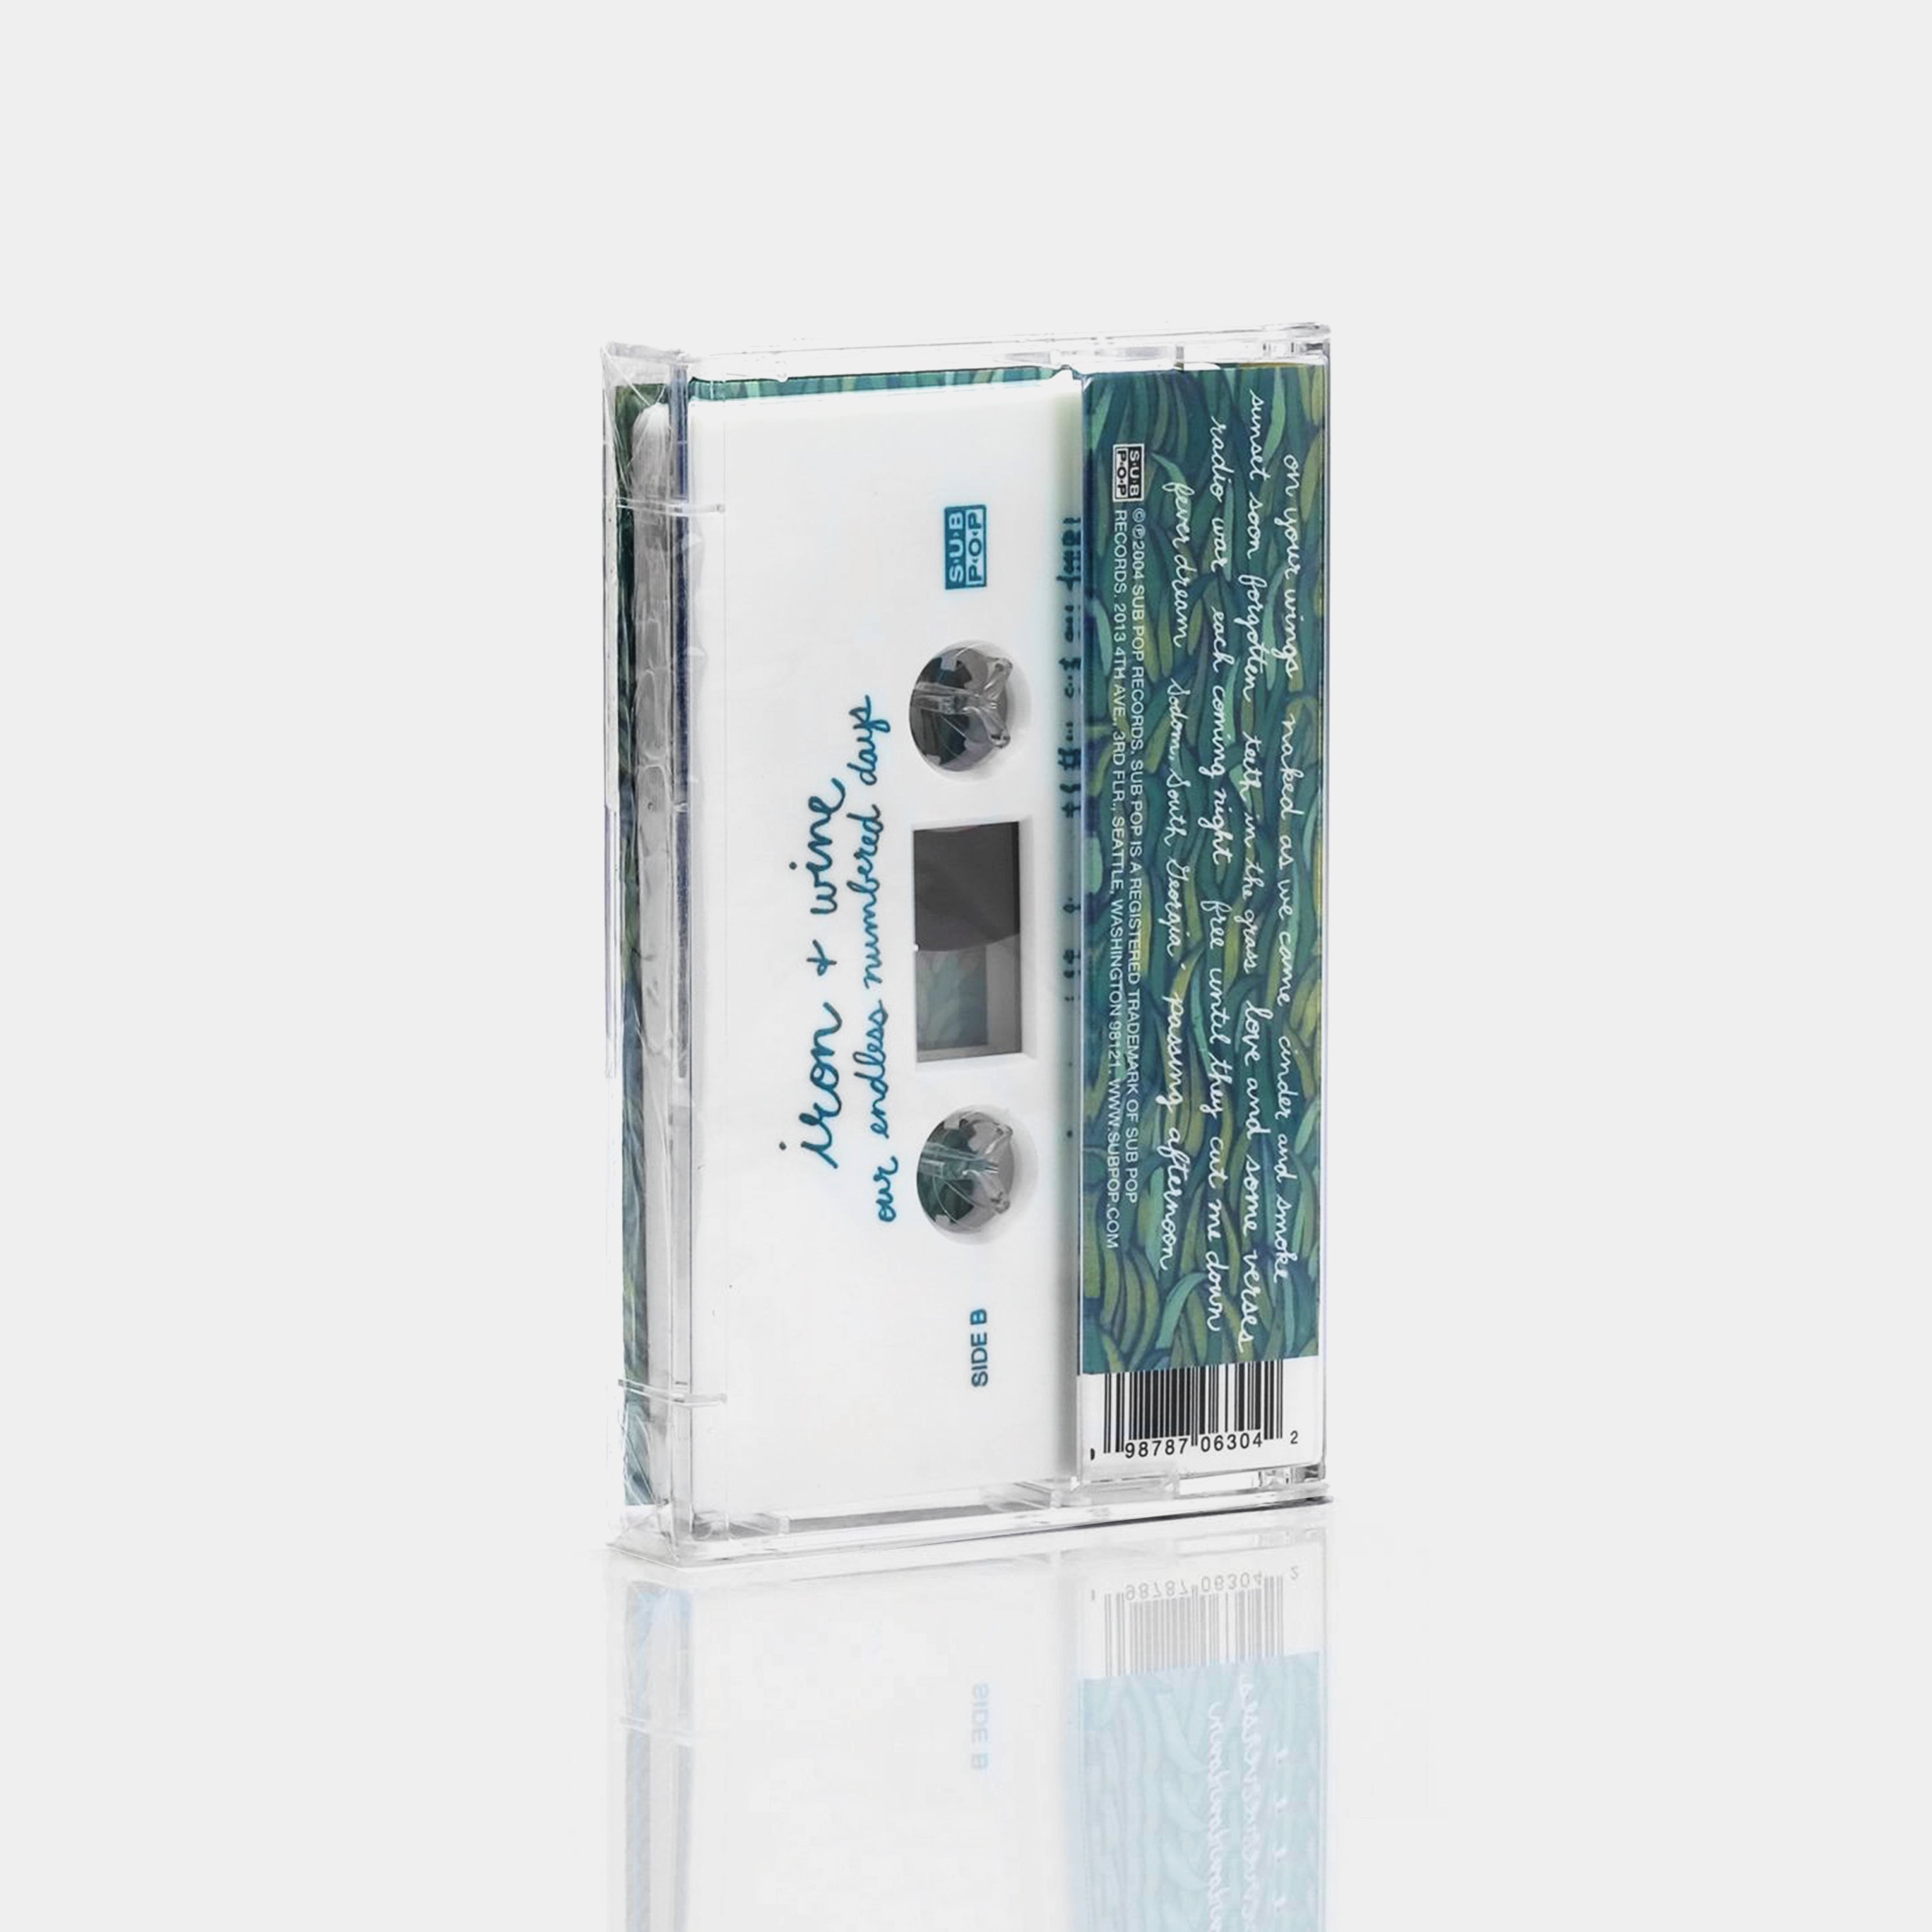 Iron & Wine - Our Endless Numbered Days Cassette Tape